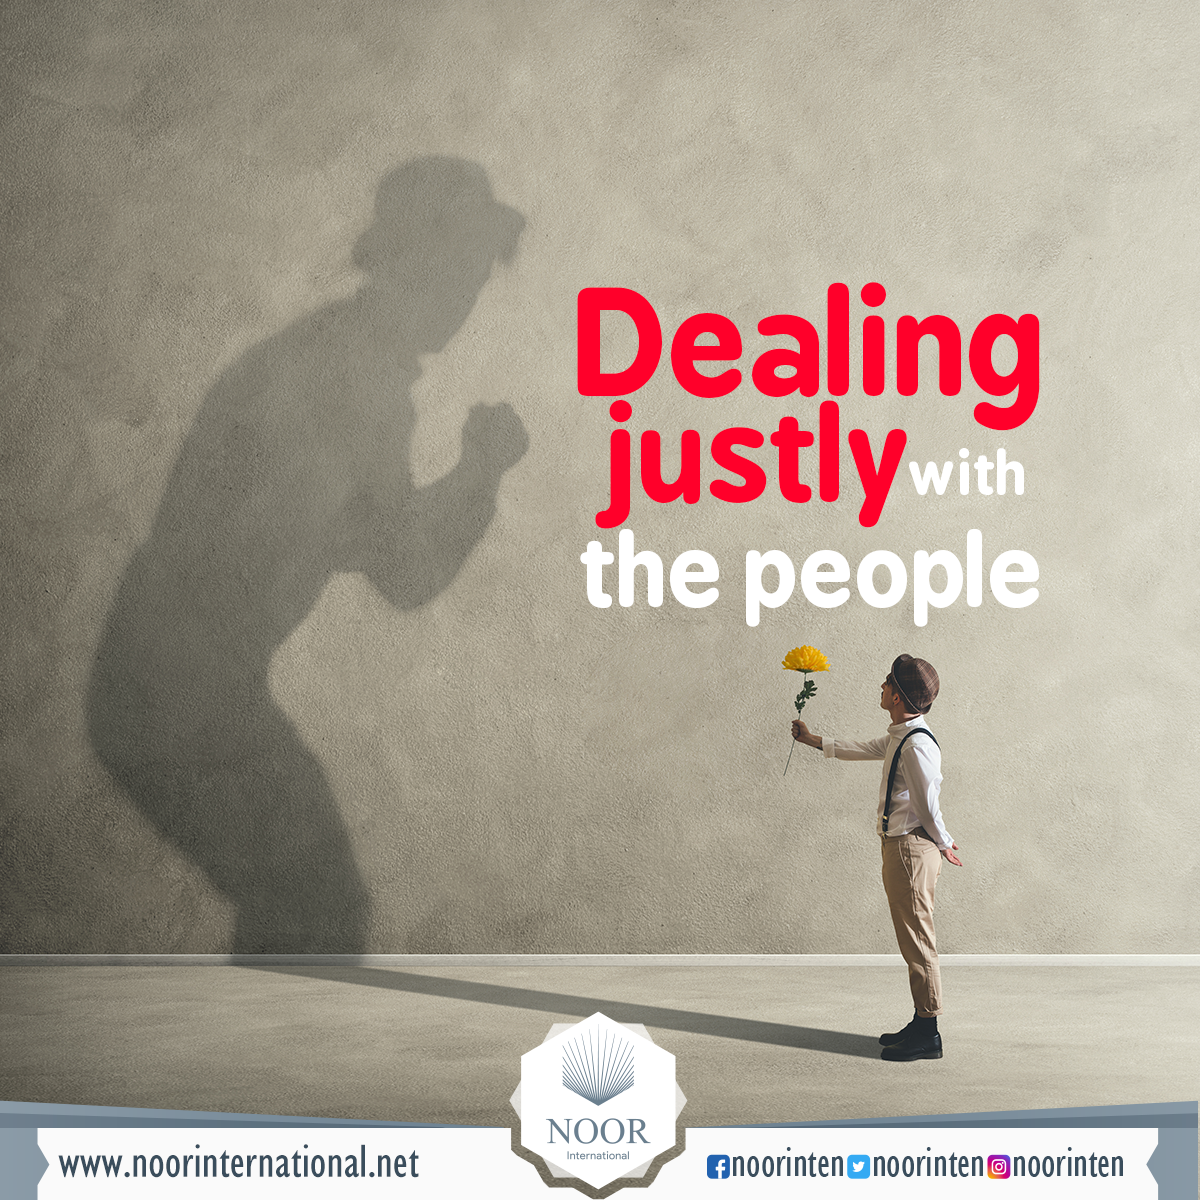 Dealing justly with the people